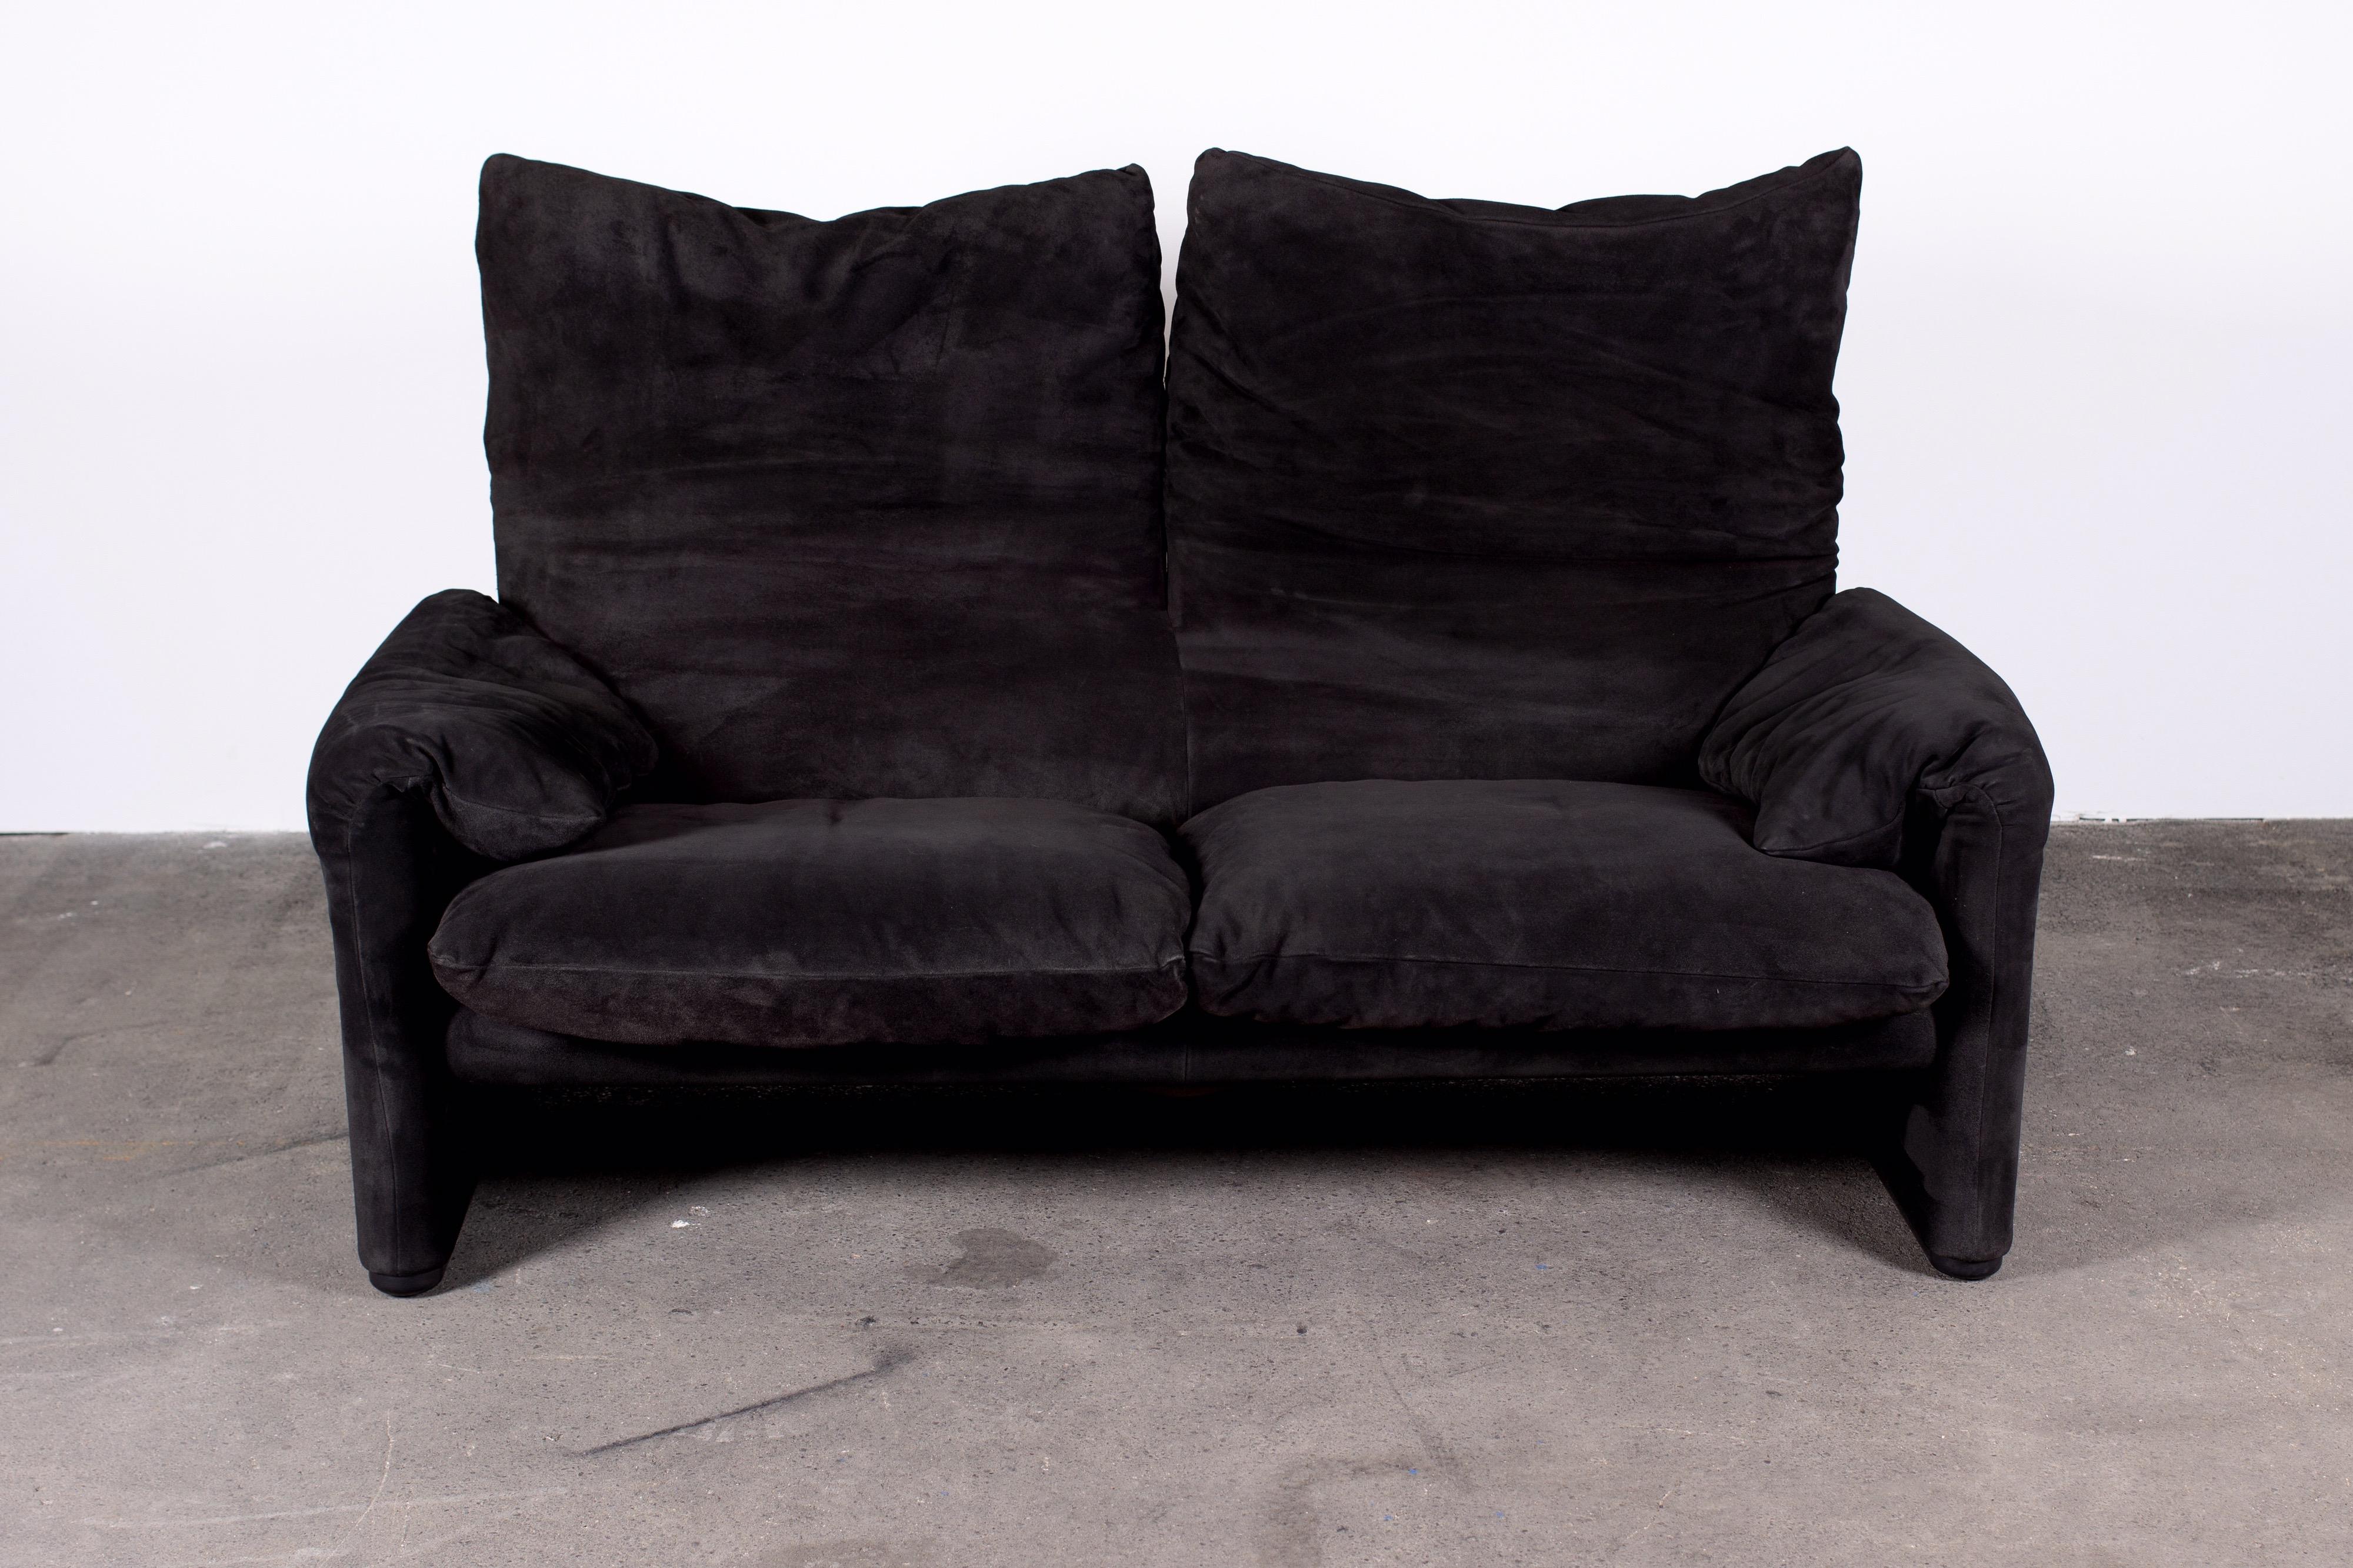 Pair of Black Suede 2-Seater Maralunga Sofas by Vico Magistretti for Cassina 2